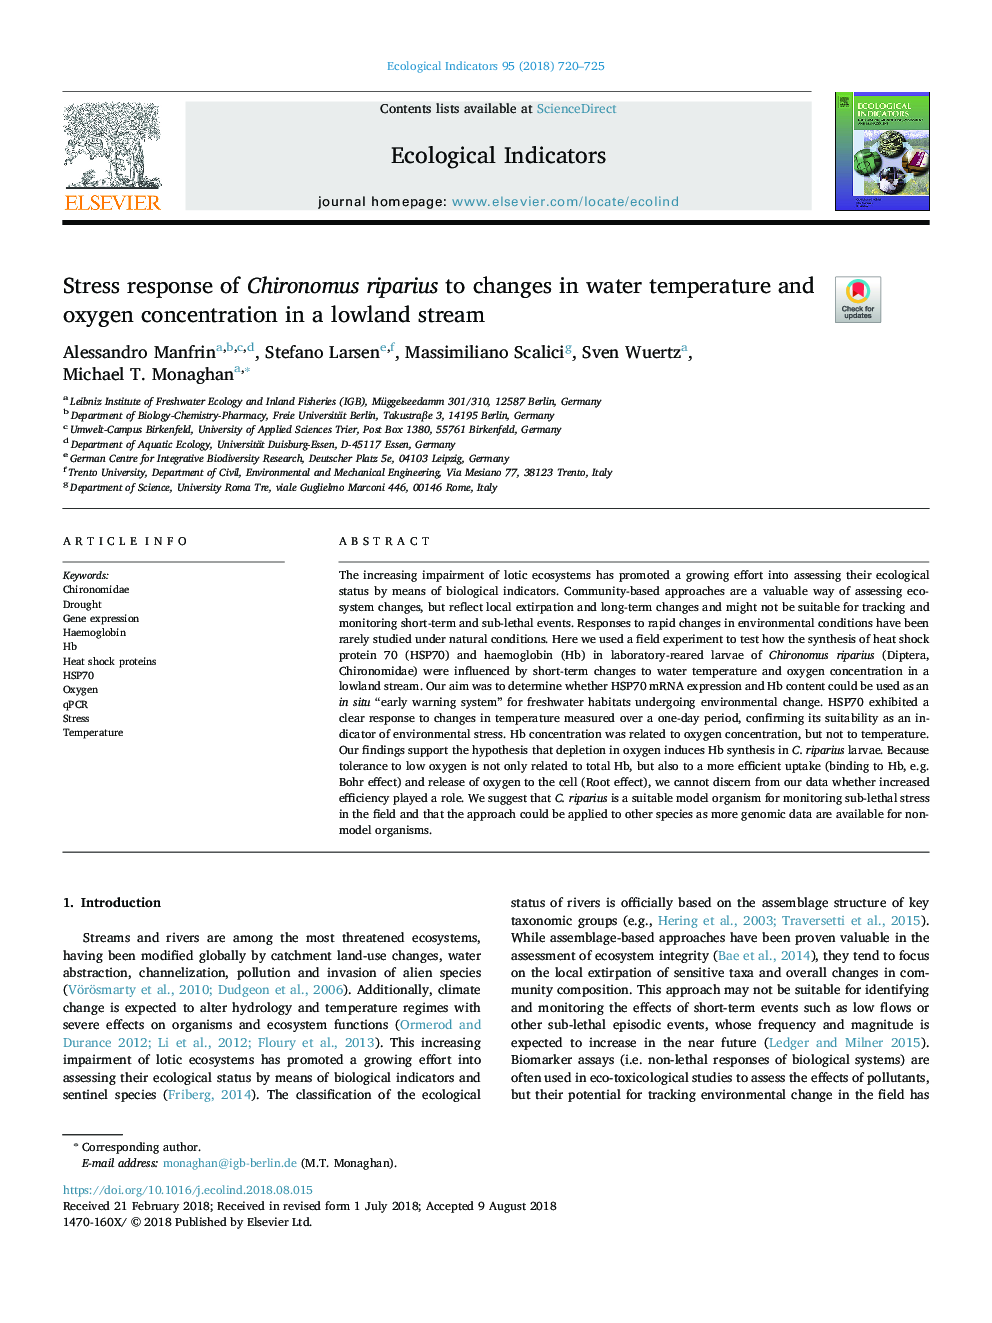 Stress response of Chironomus riparius to changes in water temperature and oxygen concentration in a lowland stream